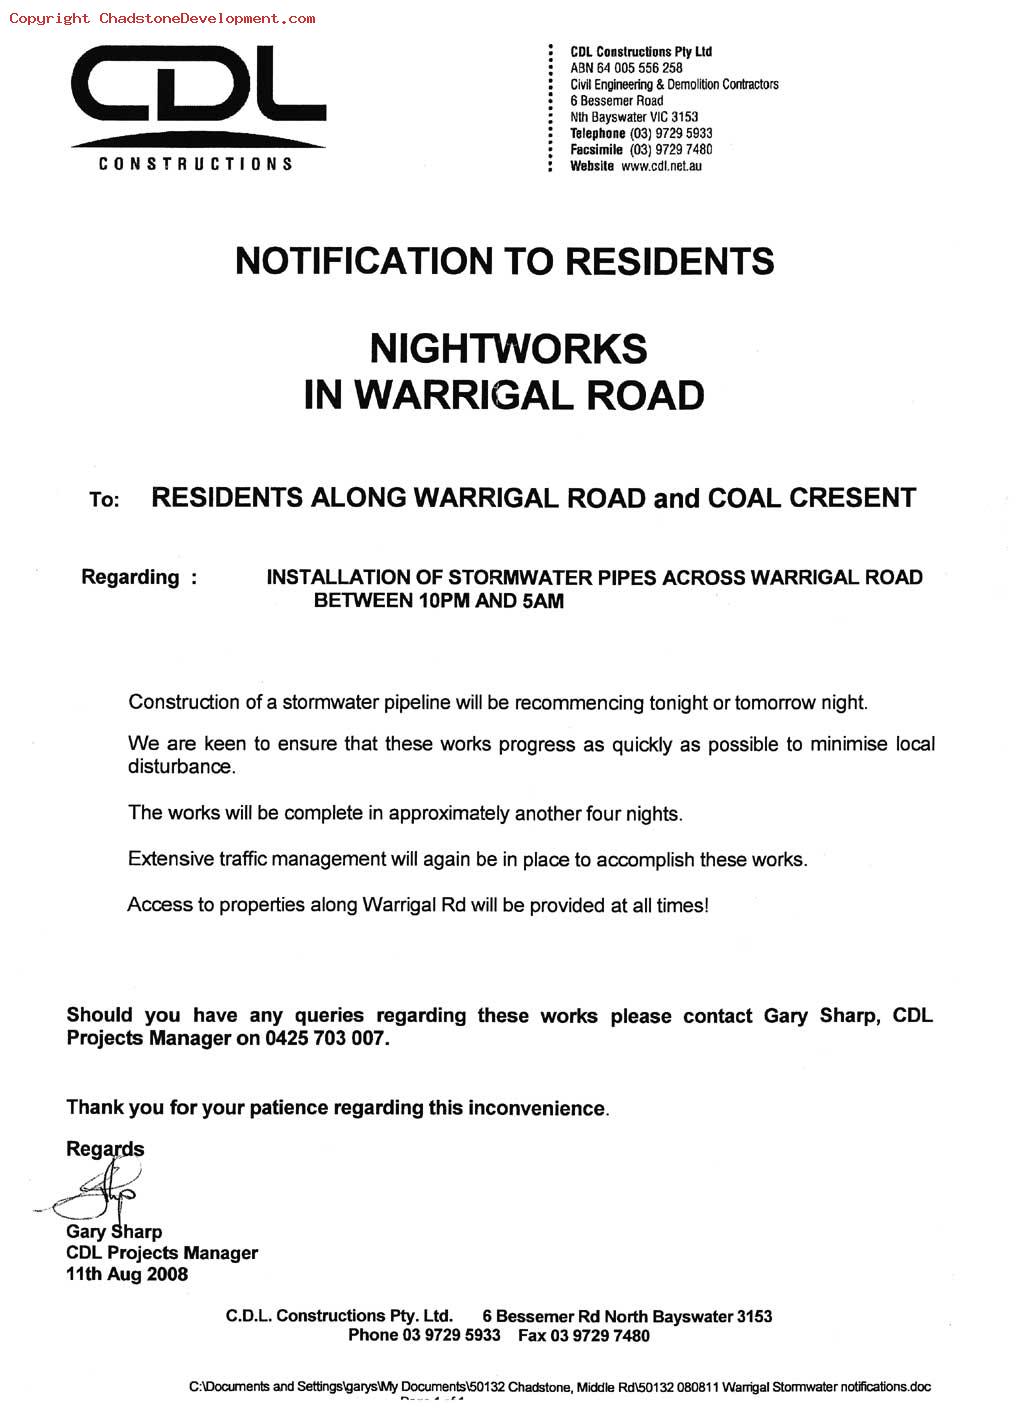 CDL warrigal roadworks notice - Chadstone Development Discussions